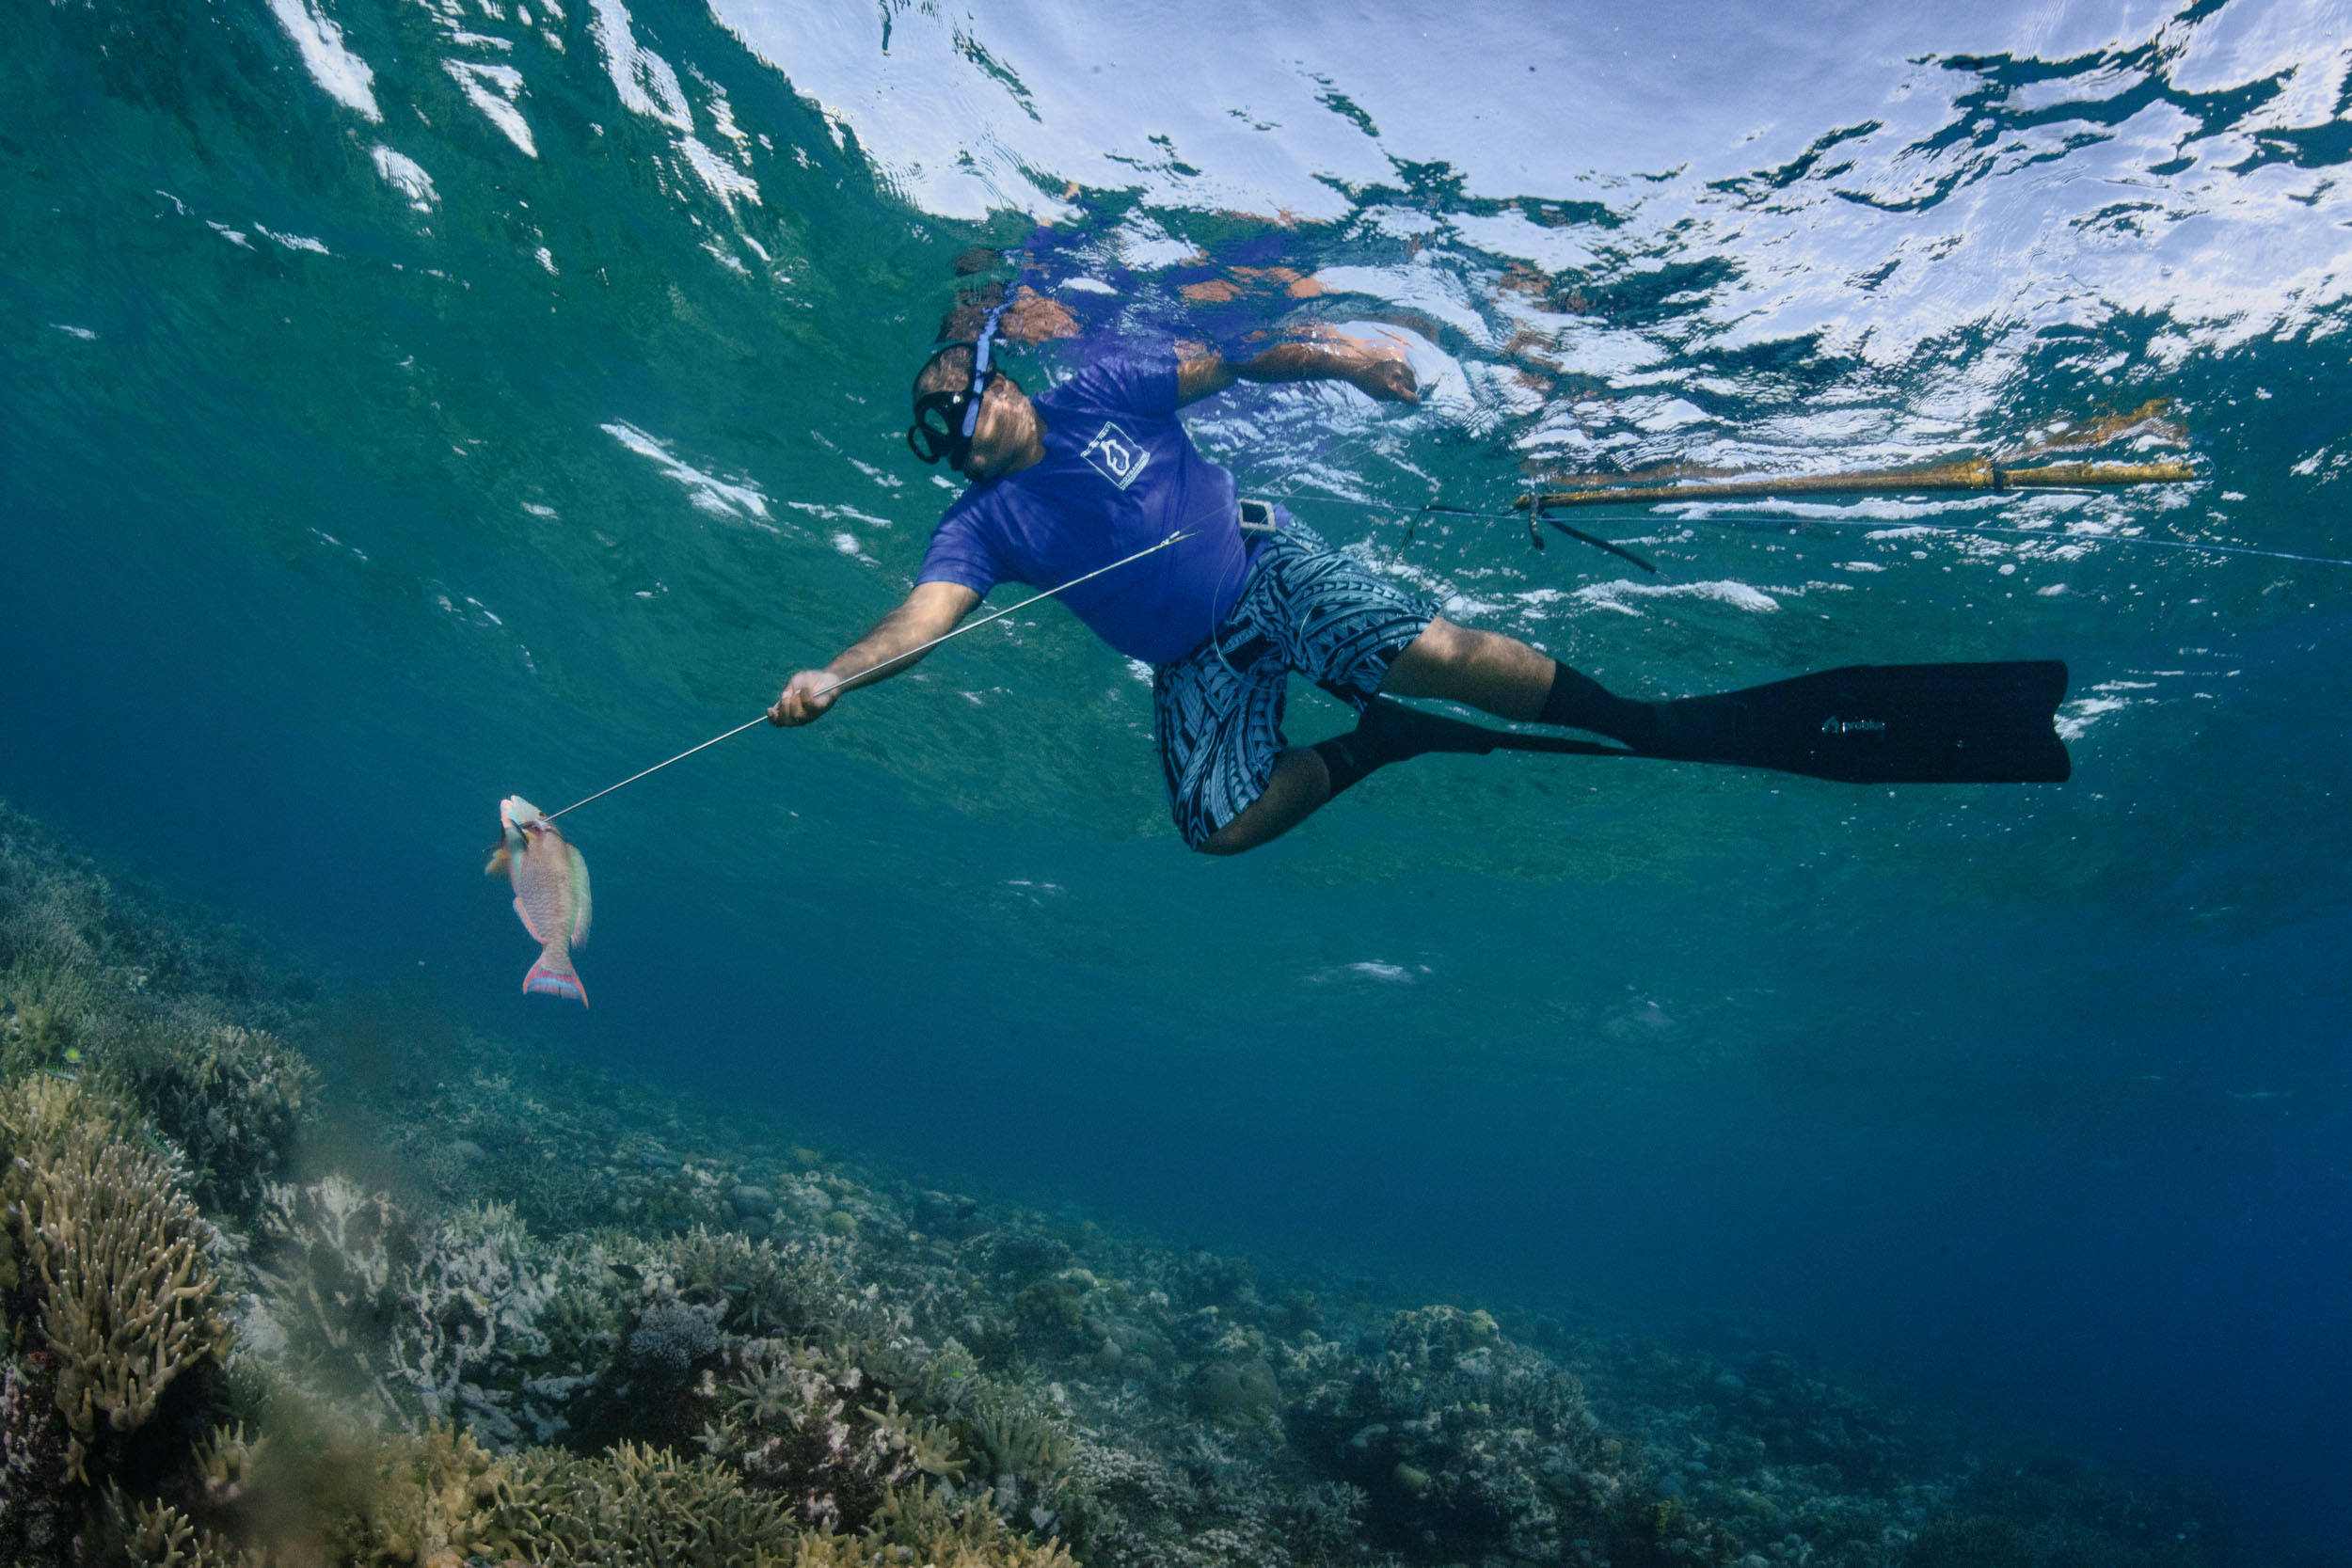 Brian Fidiiy, a Helen Reef ranger, spearfishes in the shallow Helen Reef lagoon, a coral atoll.